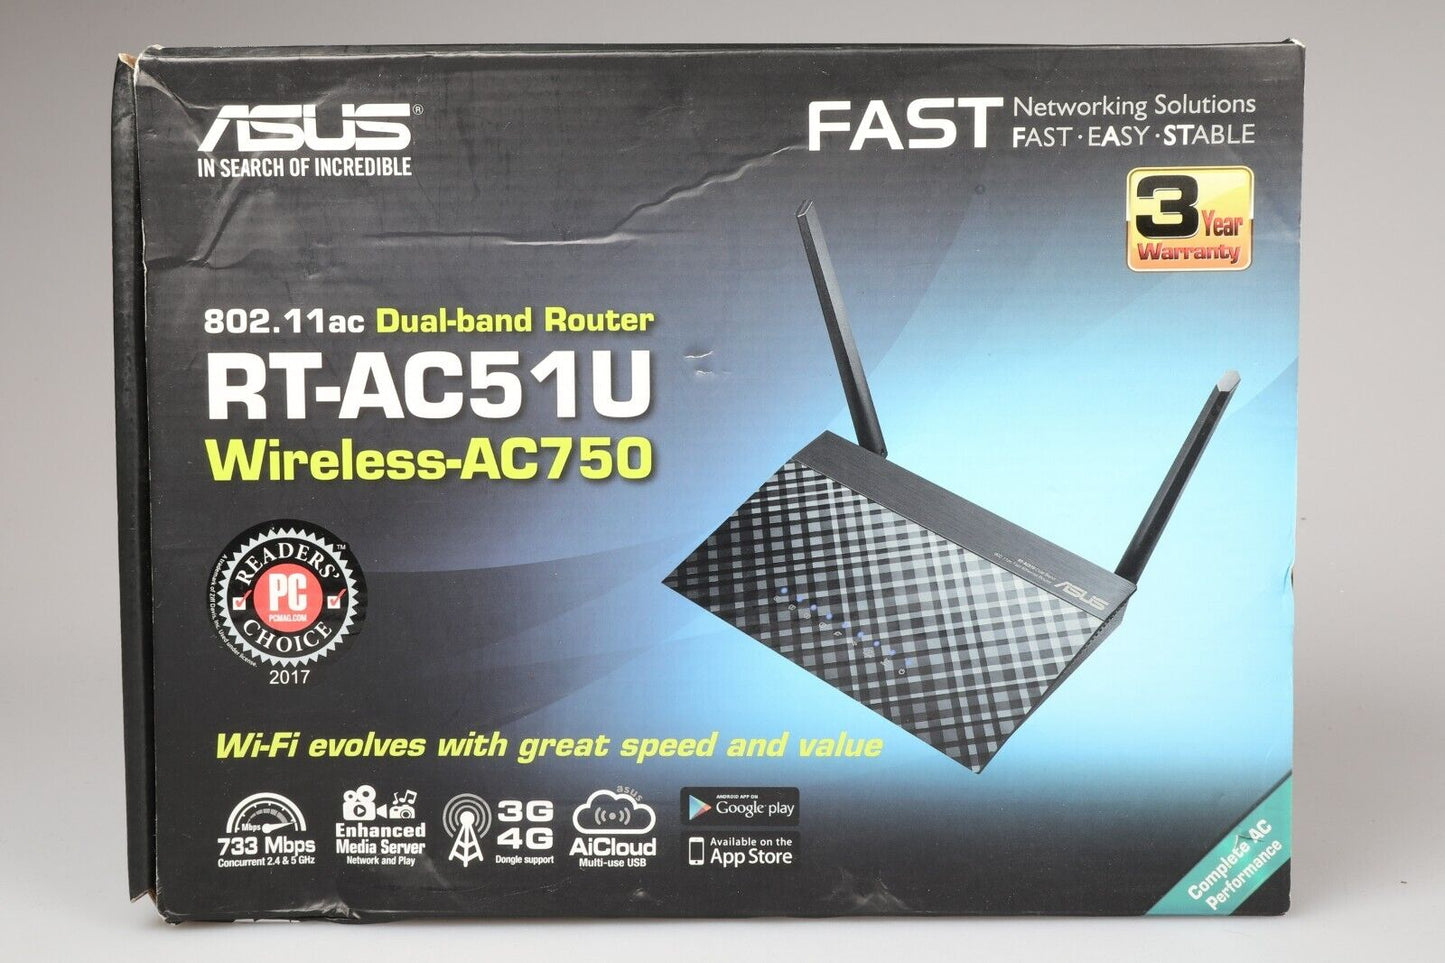 ASUS Network Solutions | RT-AC51U Wireless AC750 Dual-Band Router